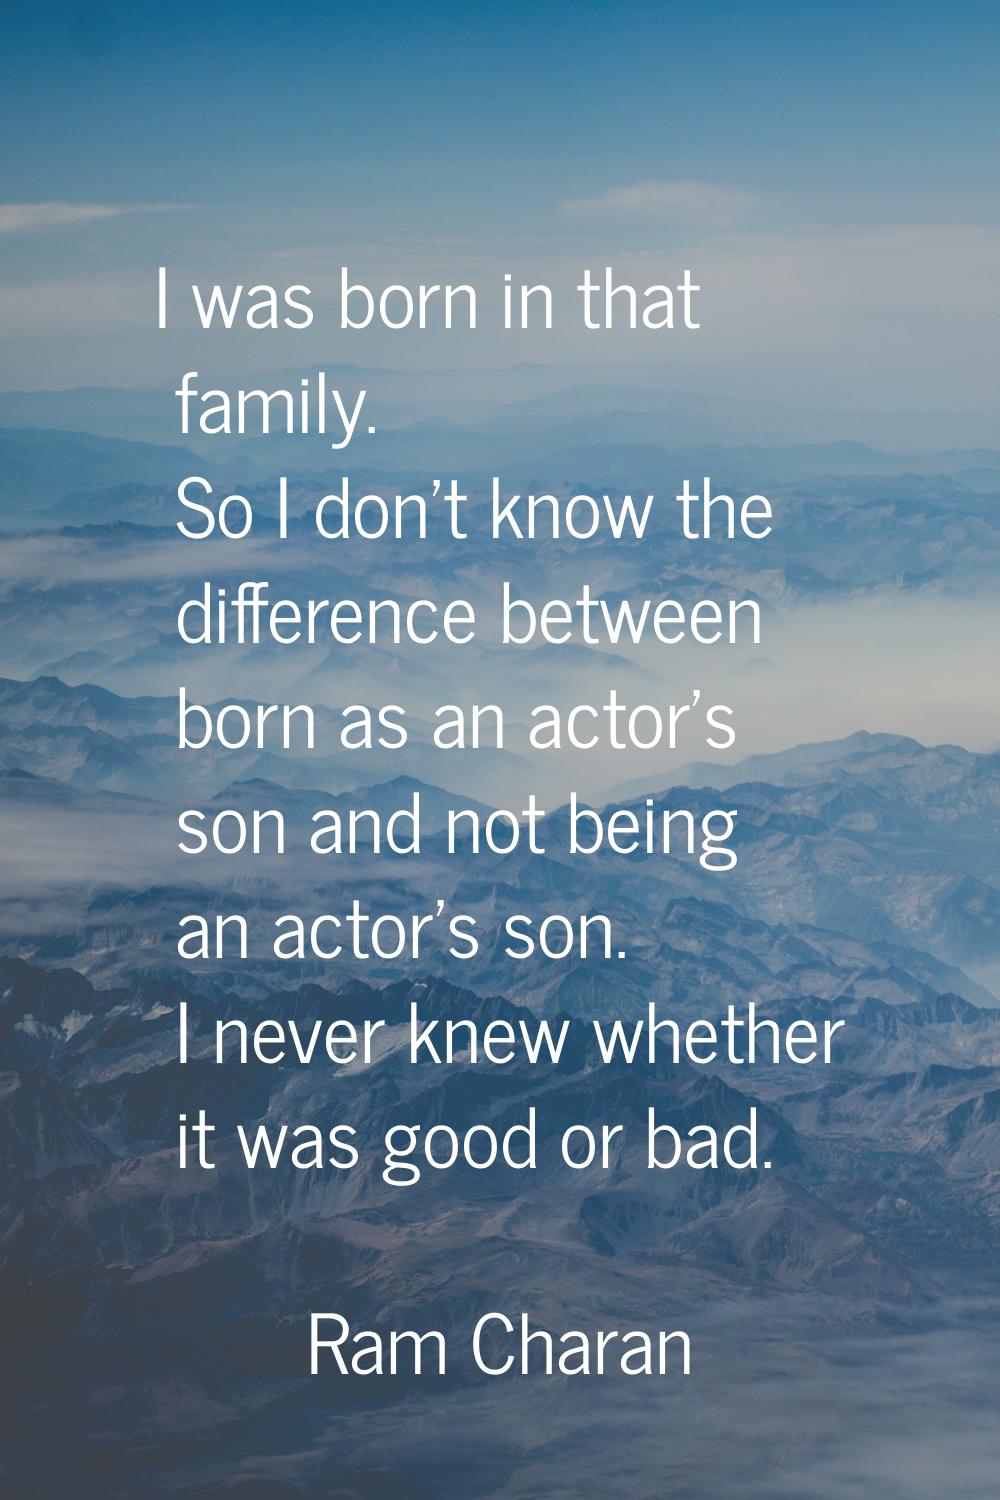 I was born in that family. So I don't know the difference between born as an actor's son and not be